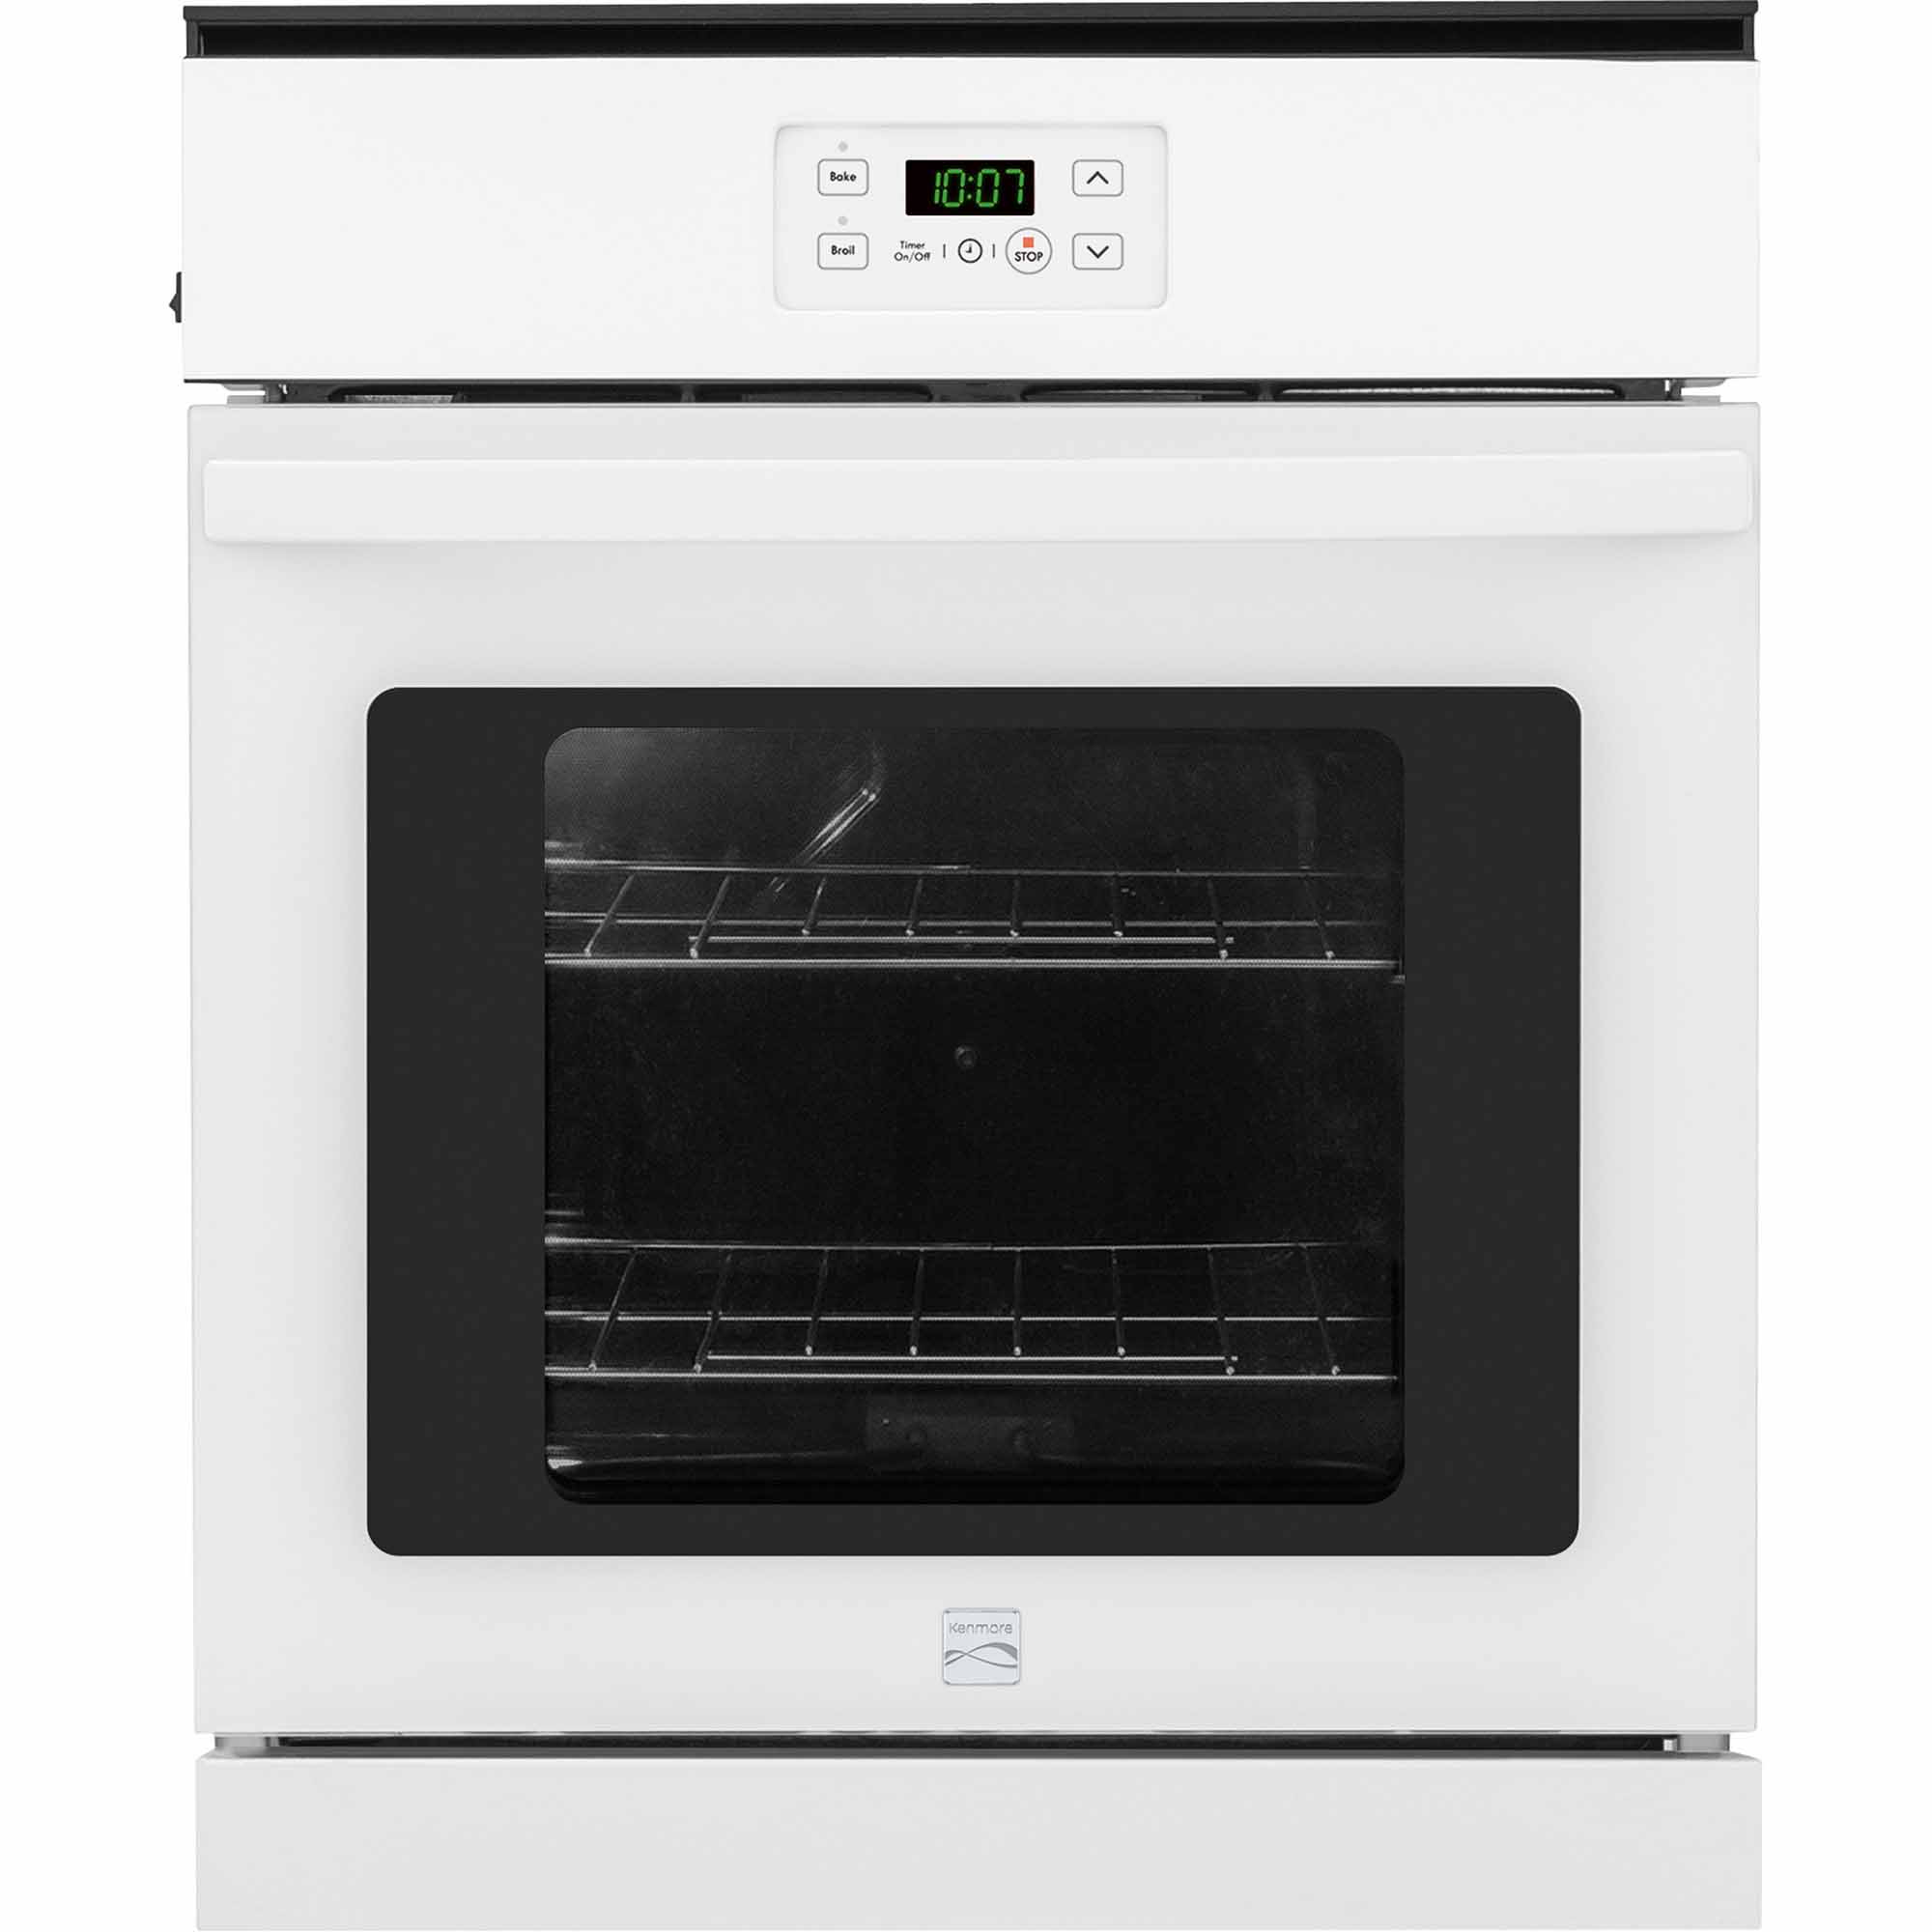 0012505802102 - 40272 24 MANUAL CLEAN ELECTRIC WALL OVEN - WHITE